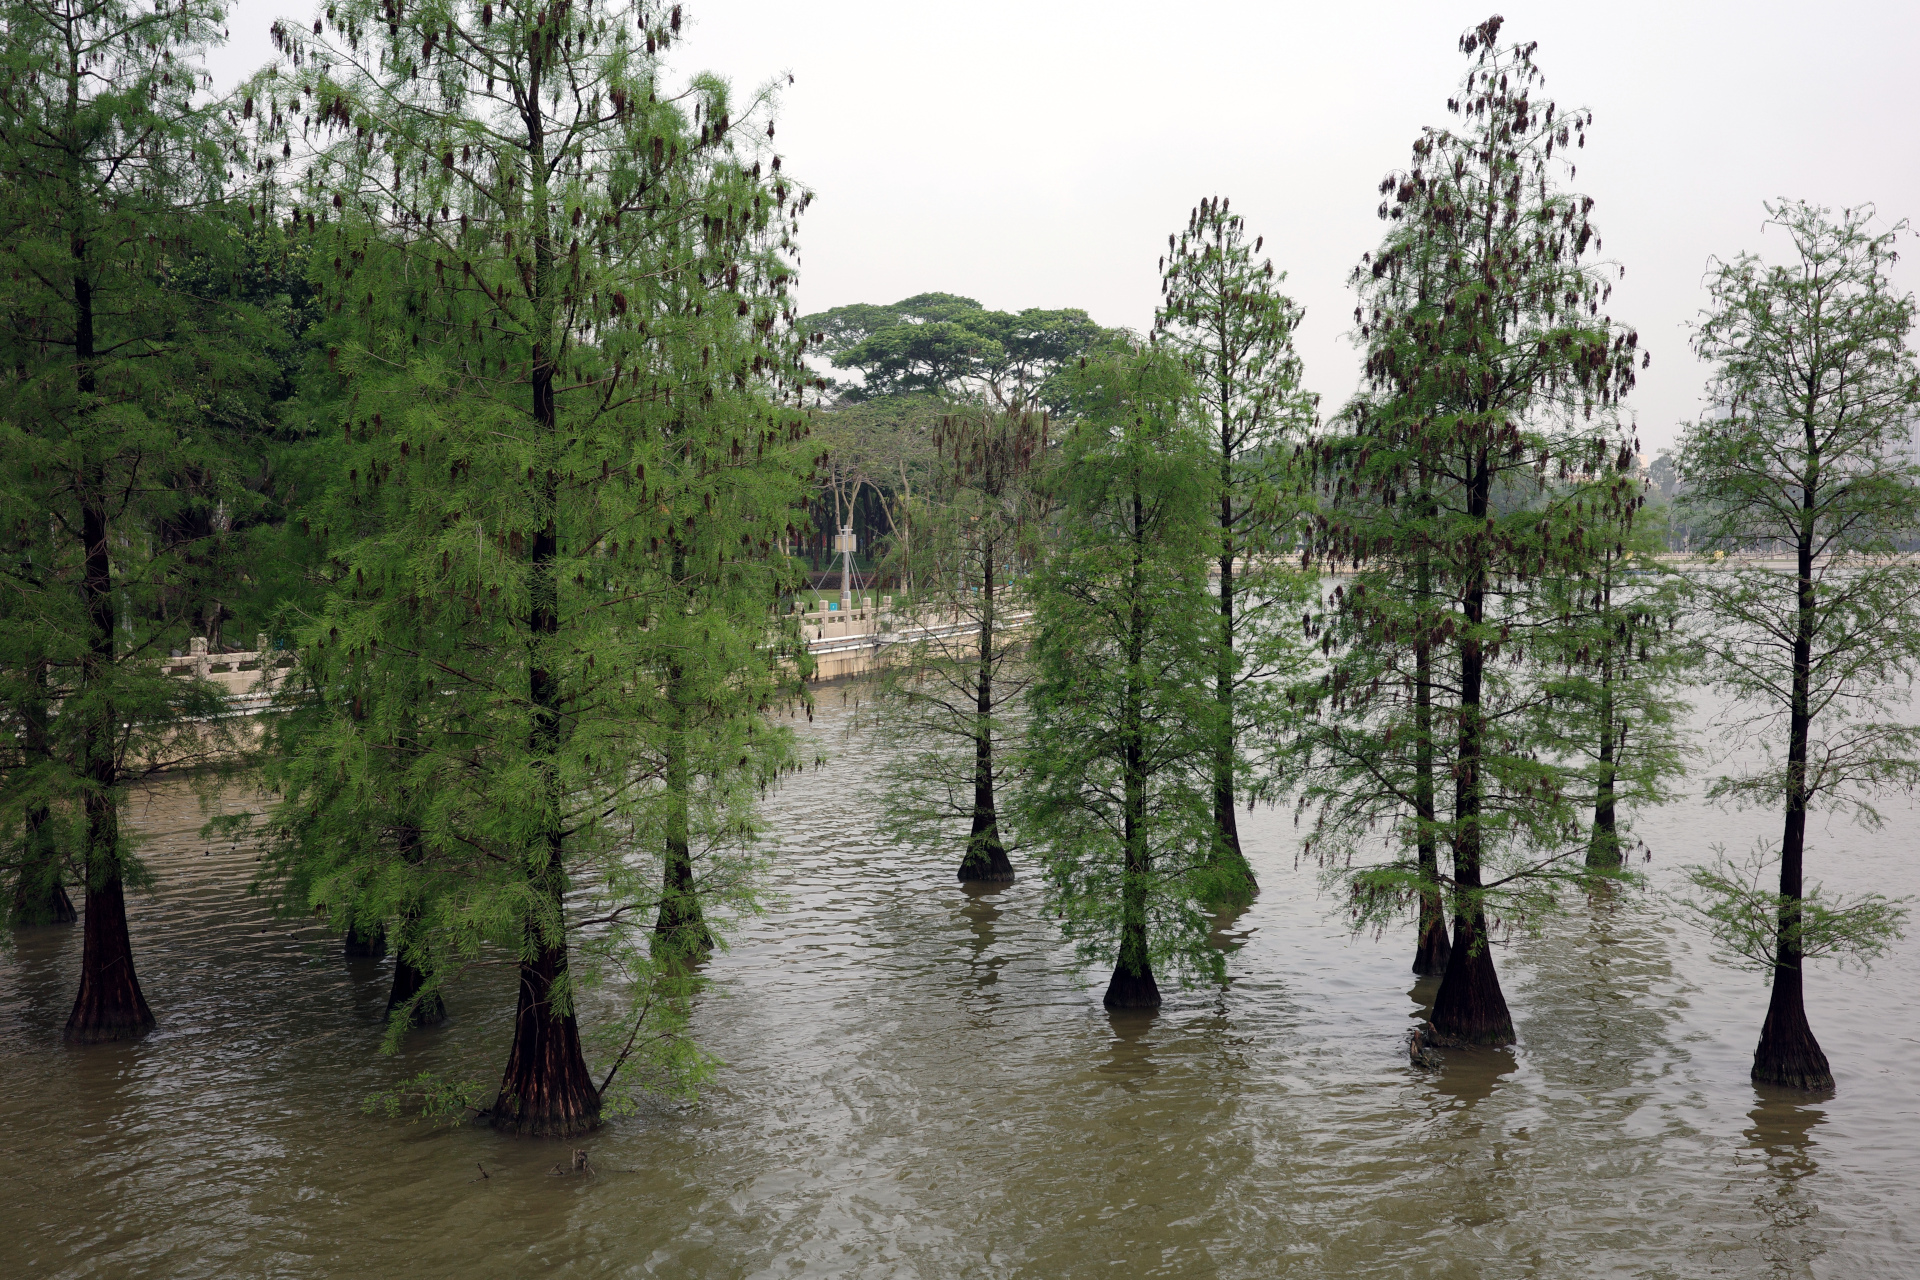 Trees growing inside the lake